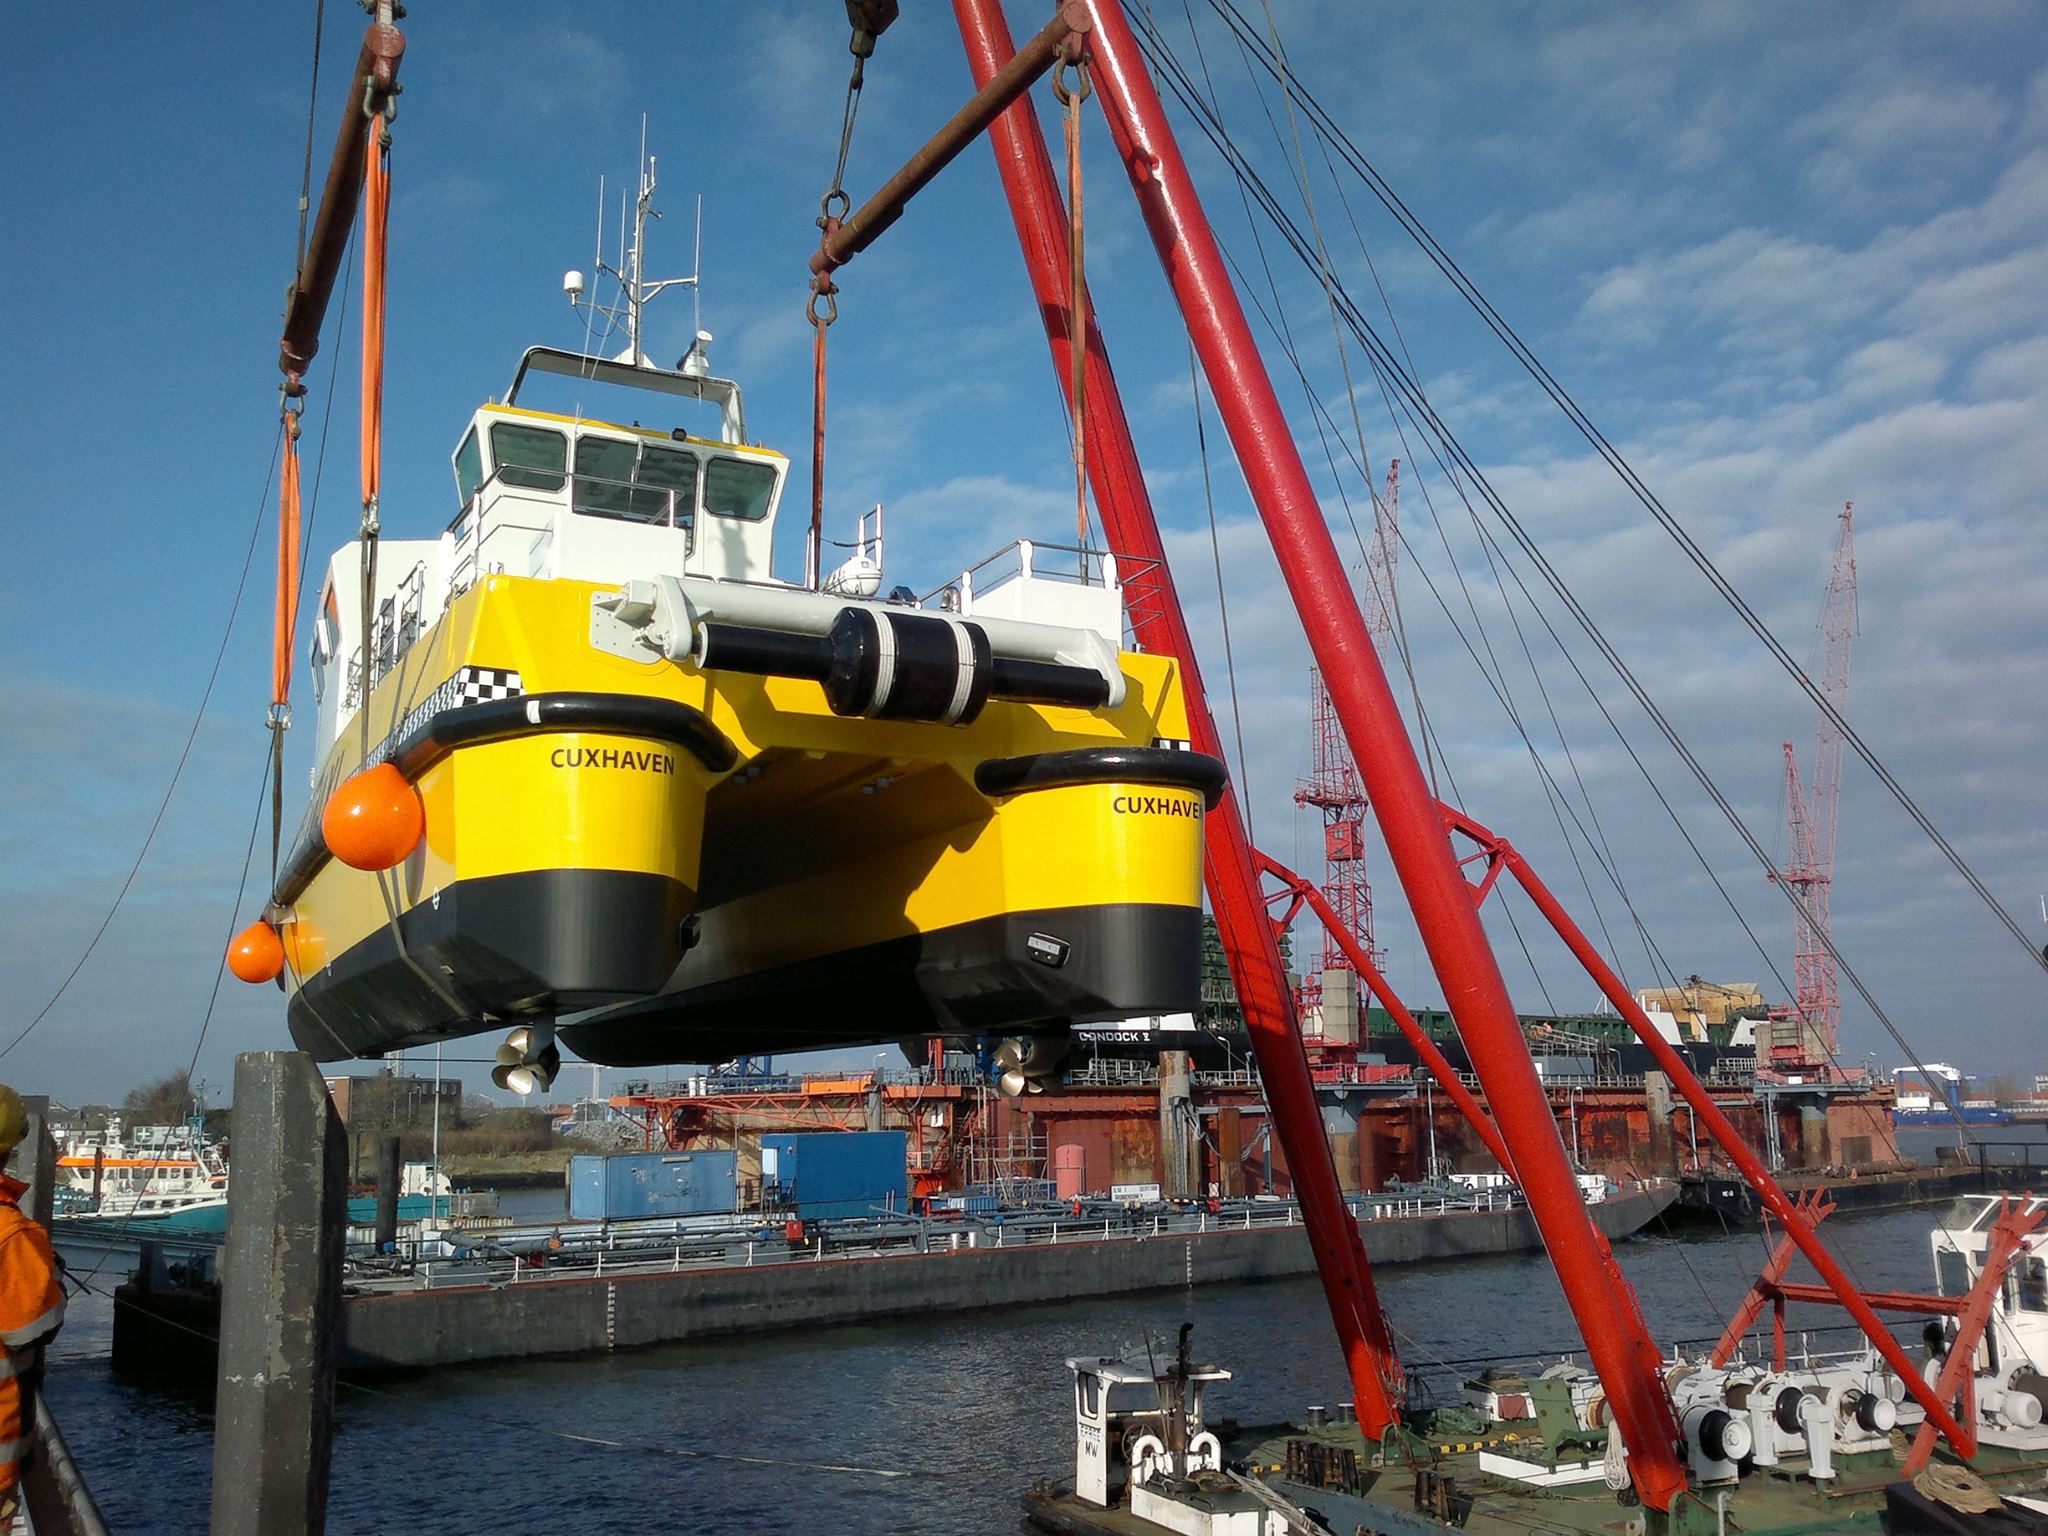 WP Offshore's New CTV Ready for Action